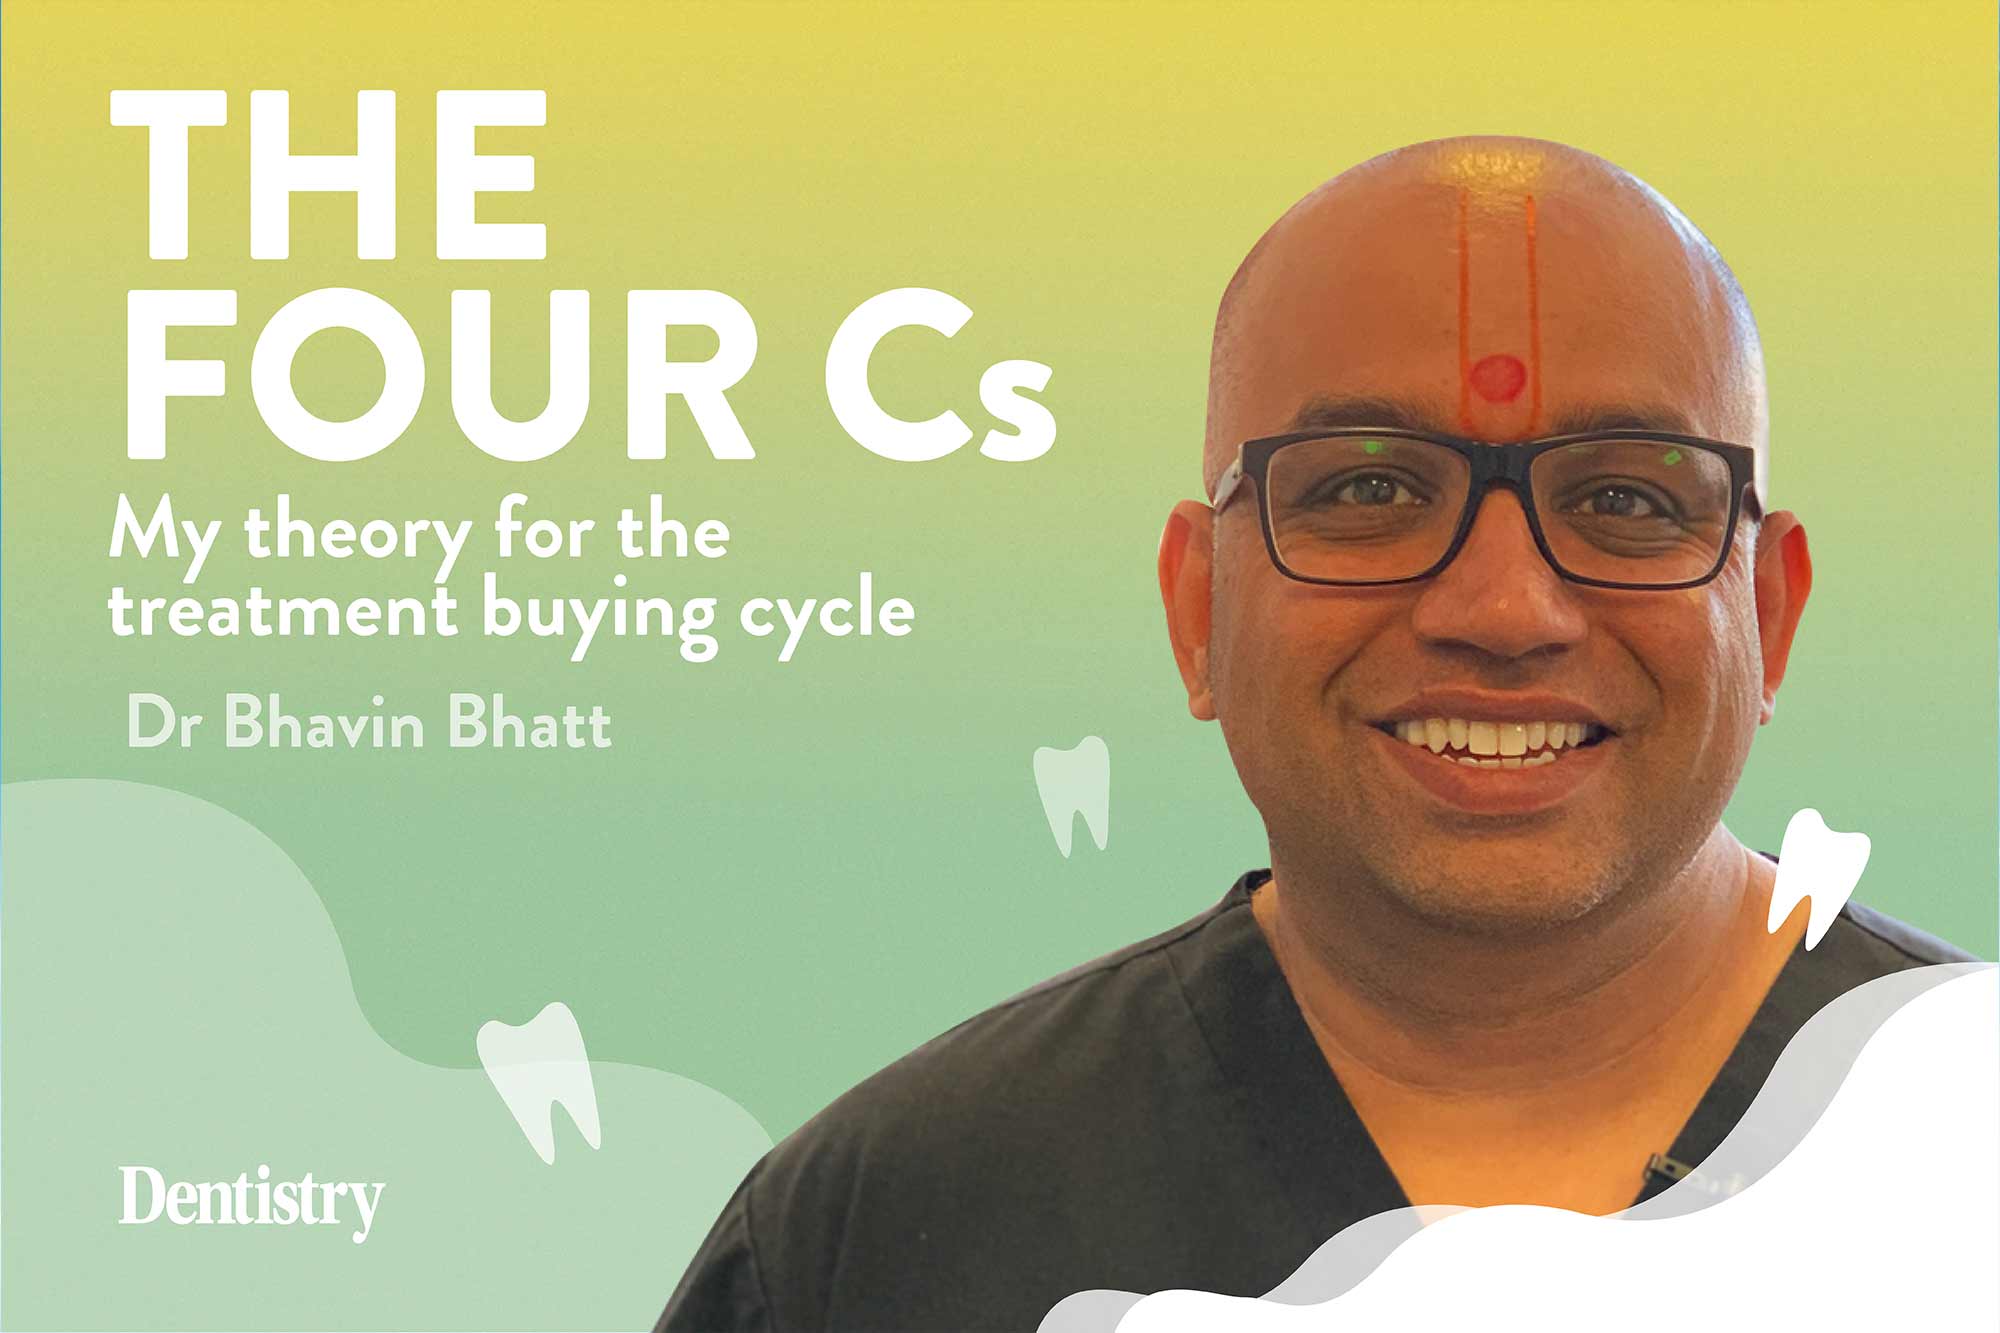 The four Cs of the treatment buying cycle – consideration